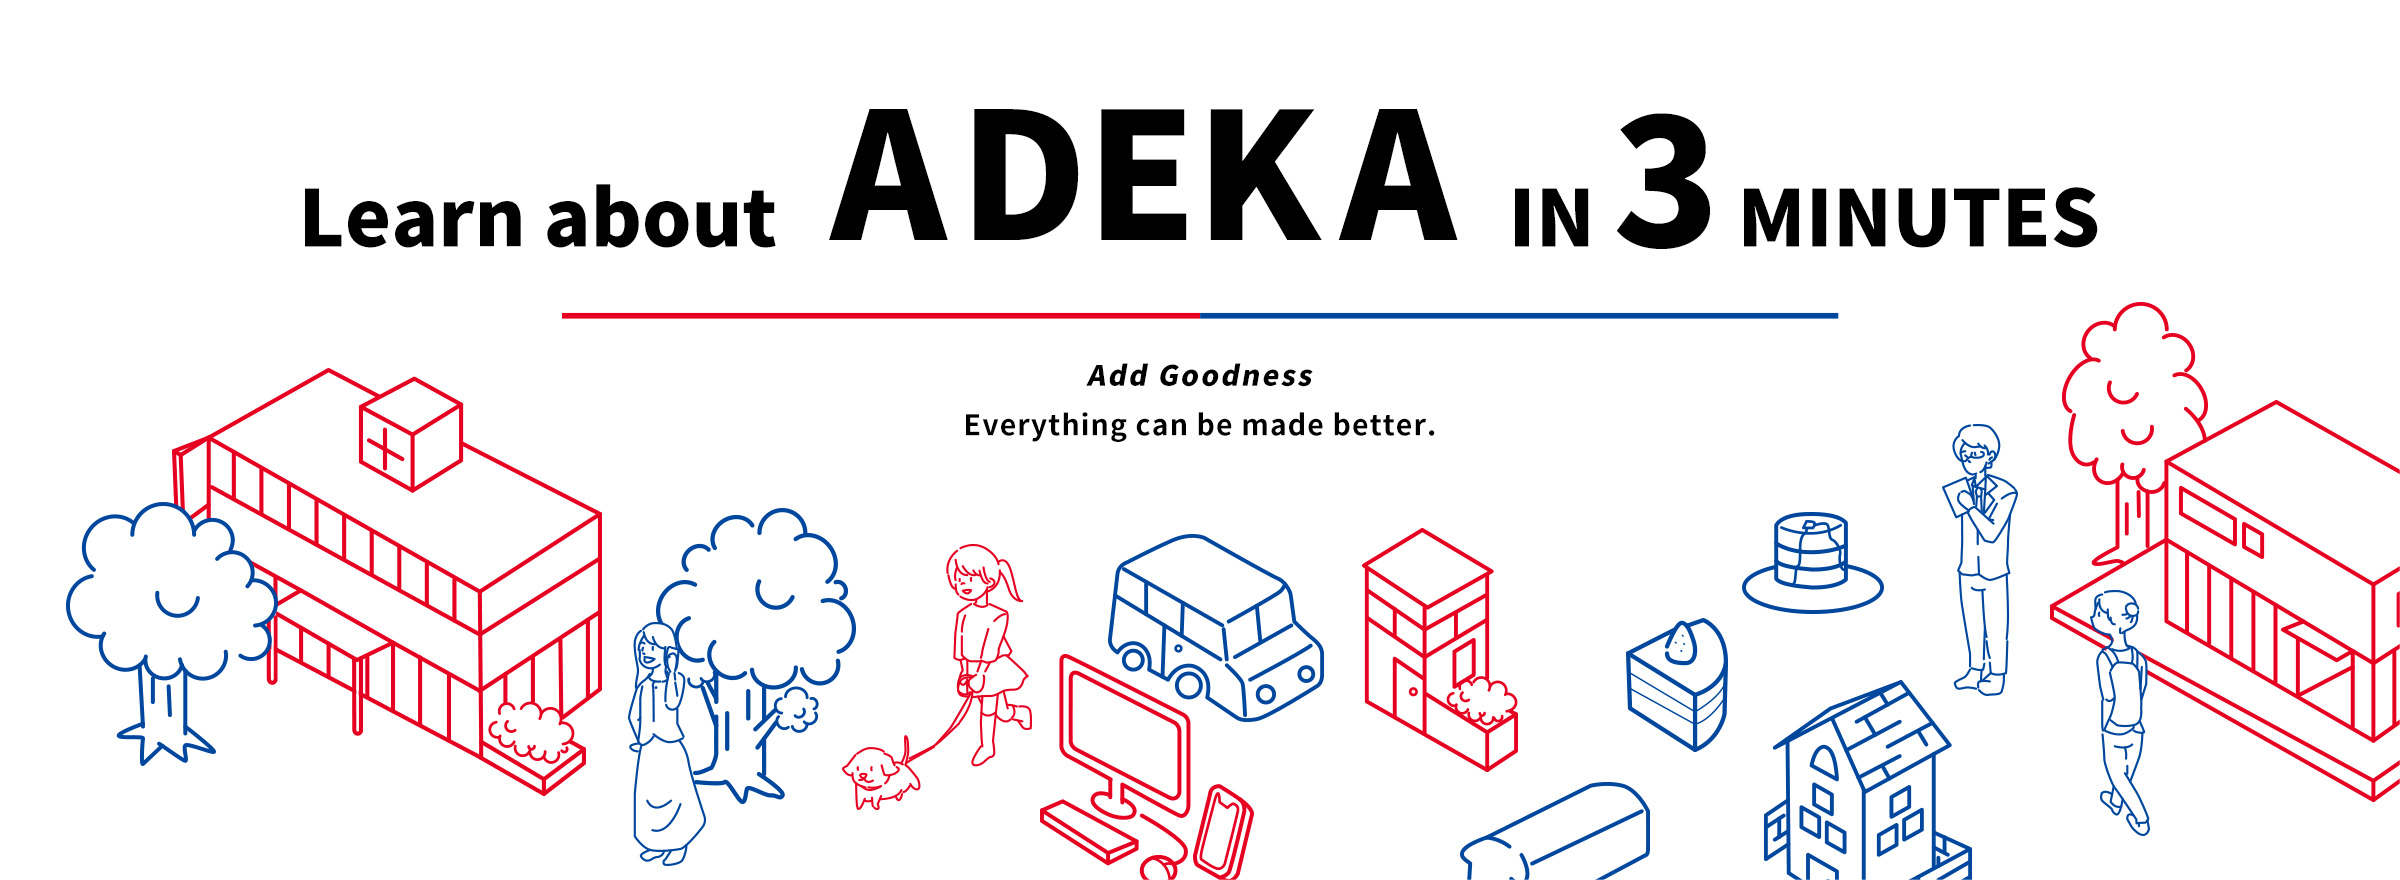 Learn about ADEKA IN 3 MINUTES